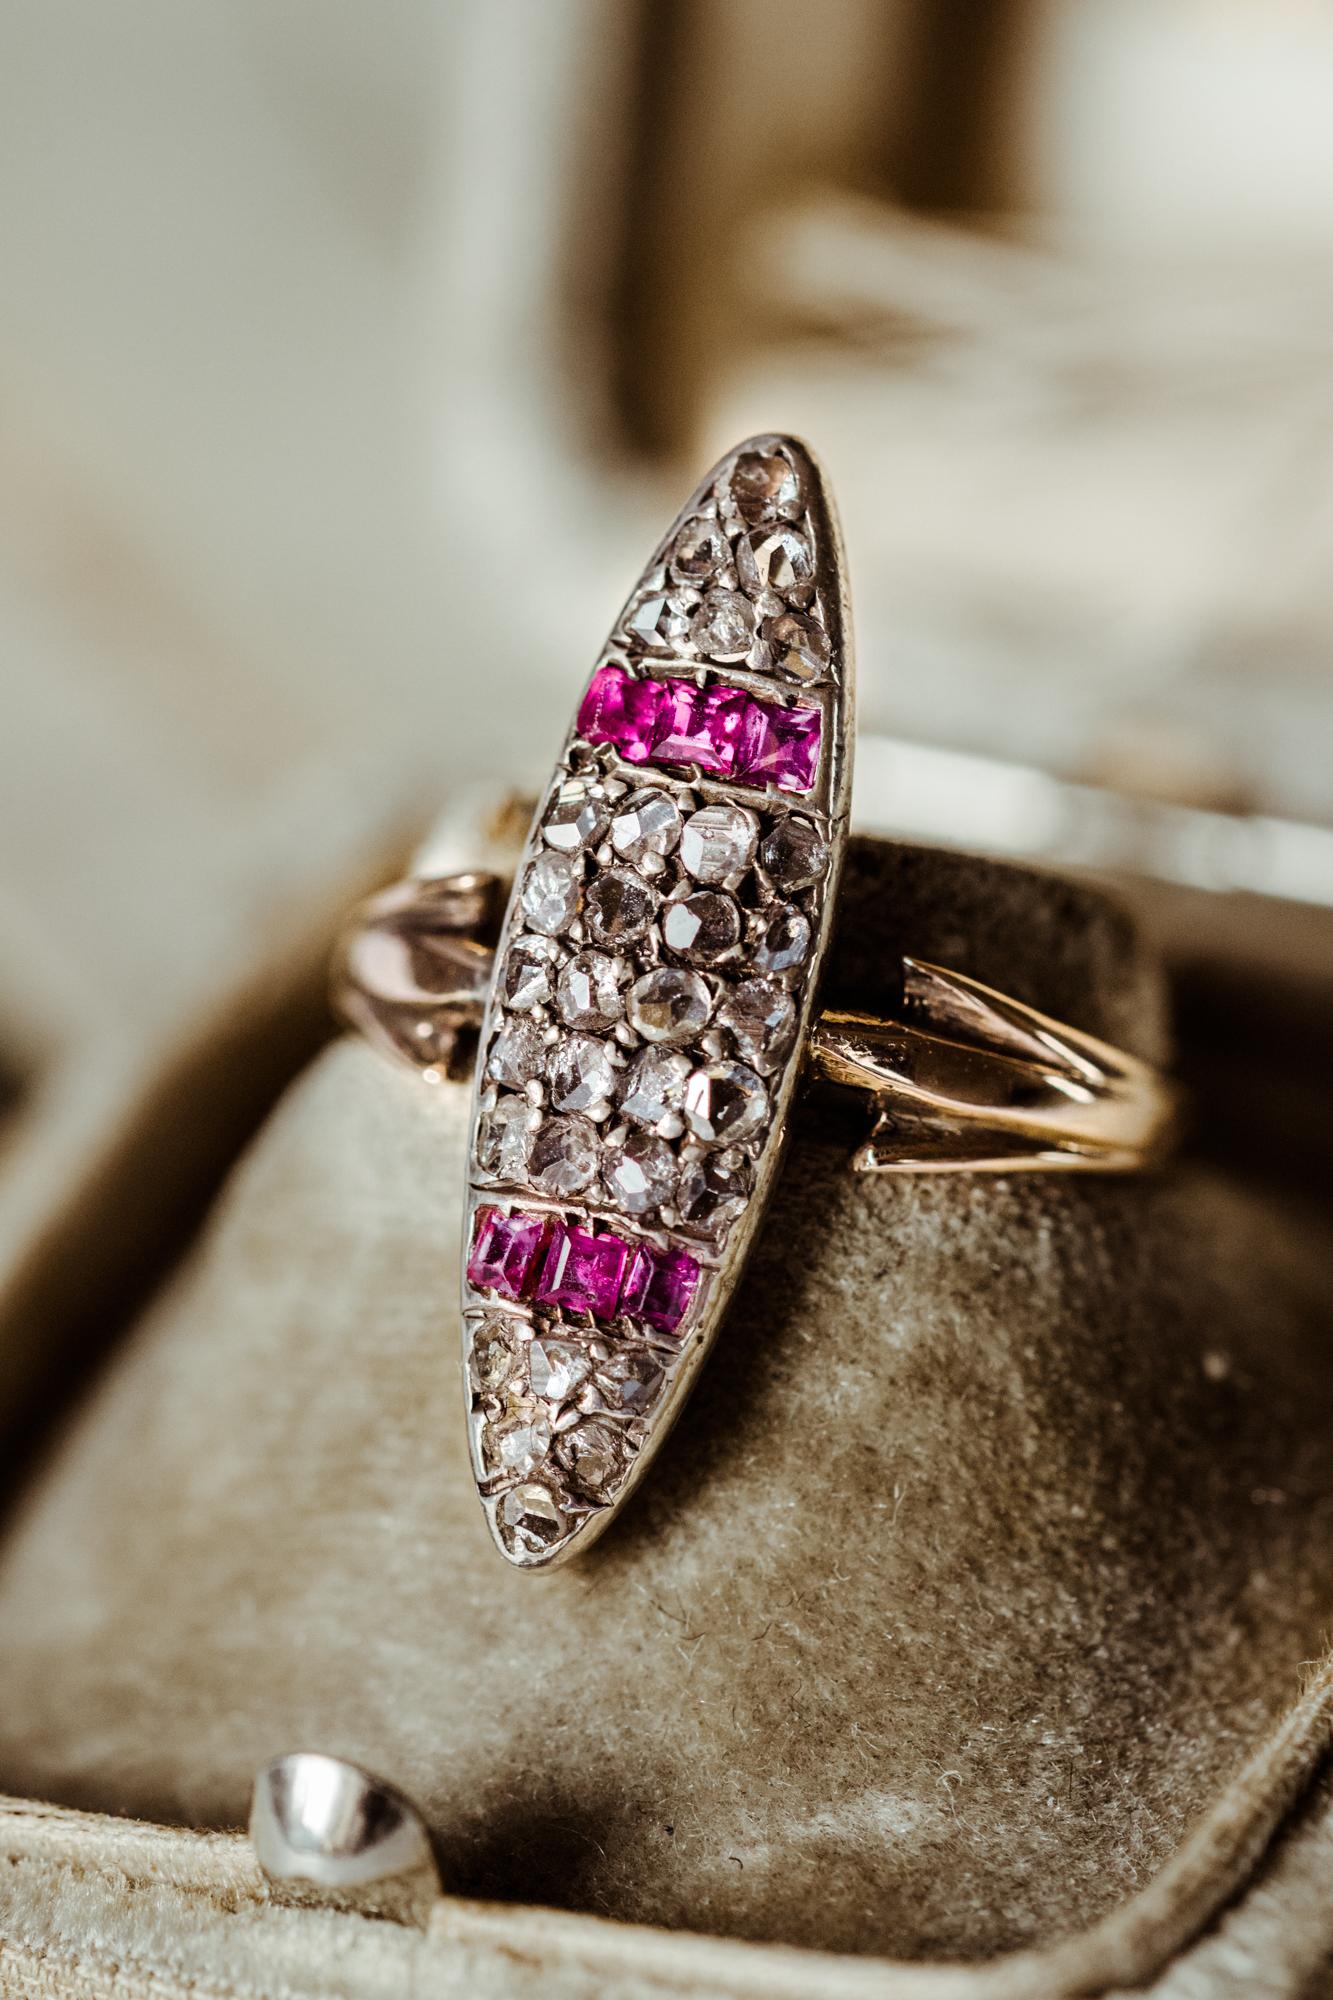 A beautiful navette Art Deco diamond ring! Set with natural diamonds and calibrated rubies this substantial gold ring was handcrafted almost 100 years ago and has stories untold. It is adorned with 20 square rubies and 30 sparkling diamonds with a